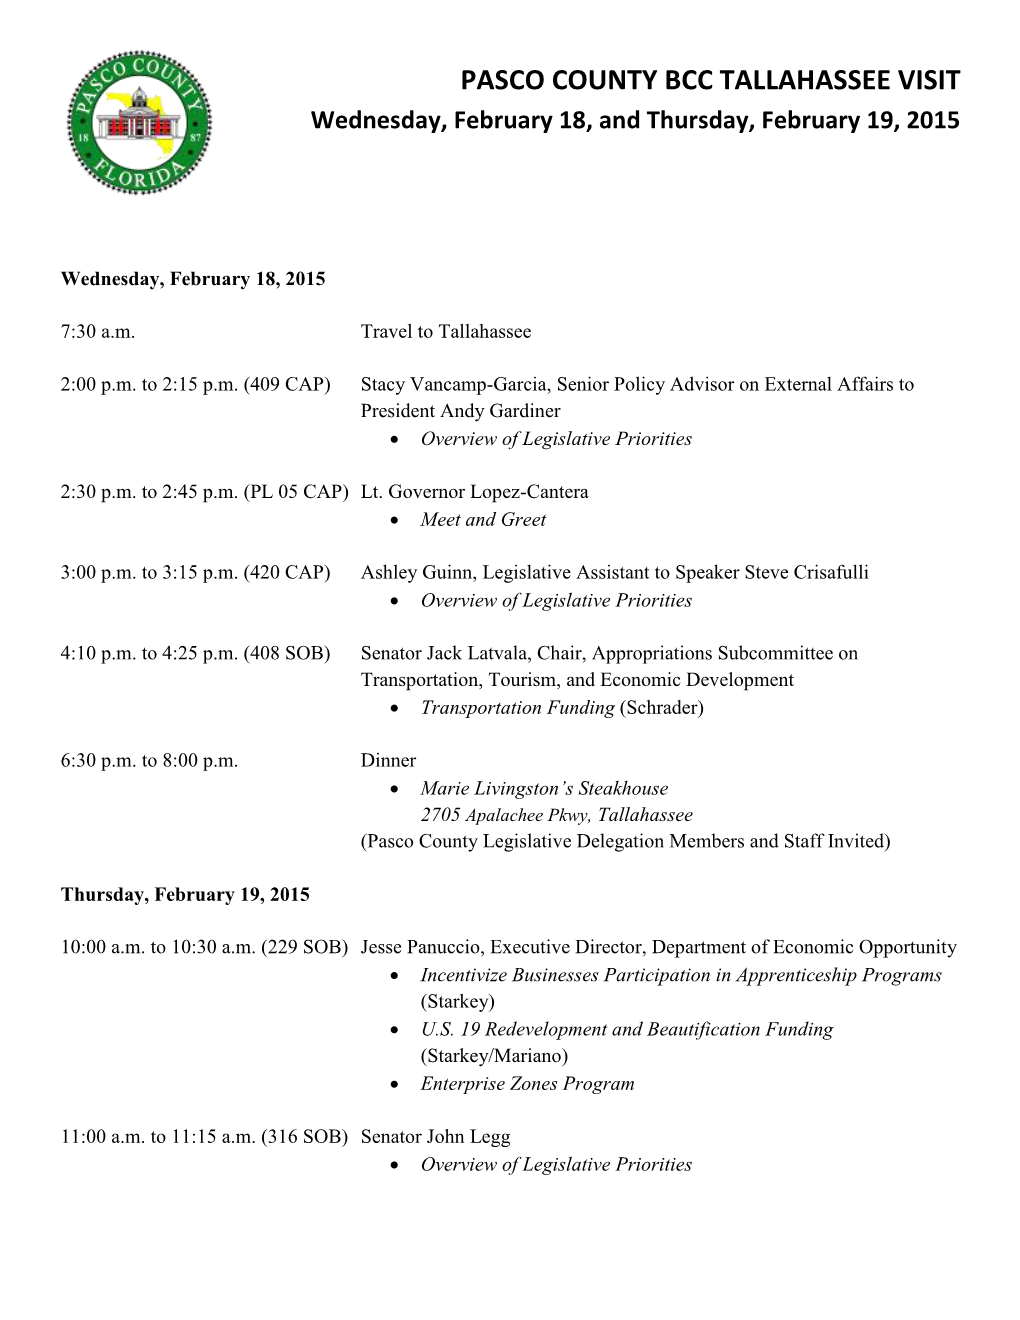 PASCO COUNTY BCC TALLAHASSEE VISIT Wednesday, February 18, and Thursday, February 19, 2015